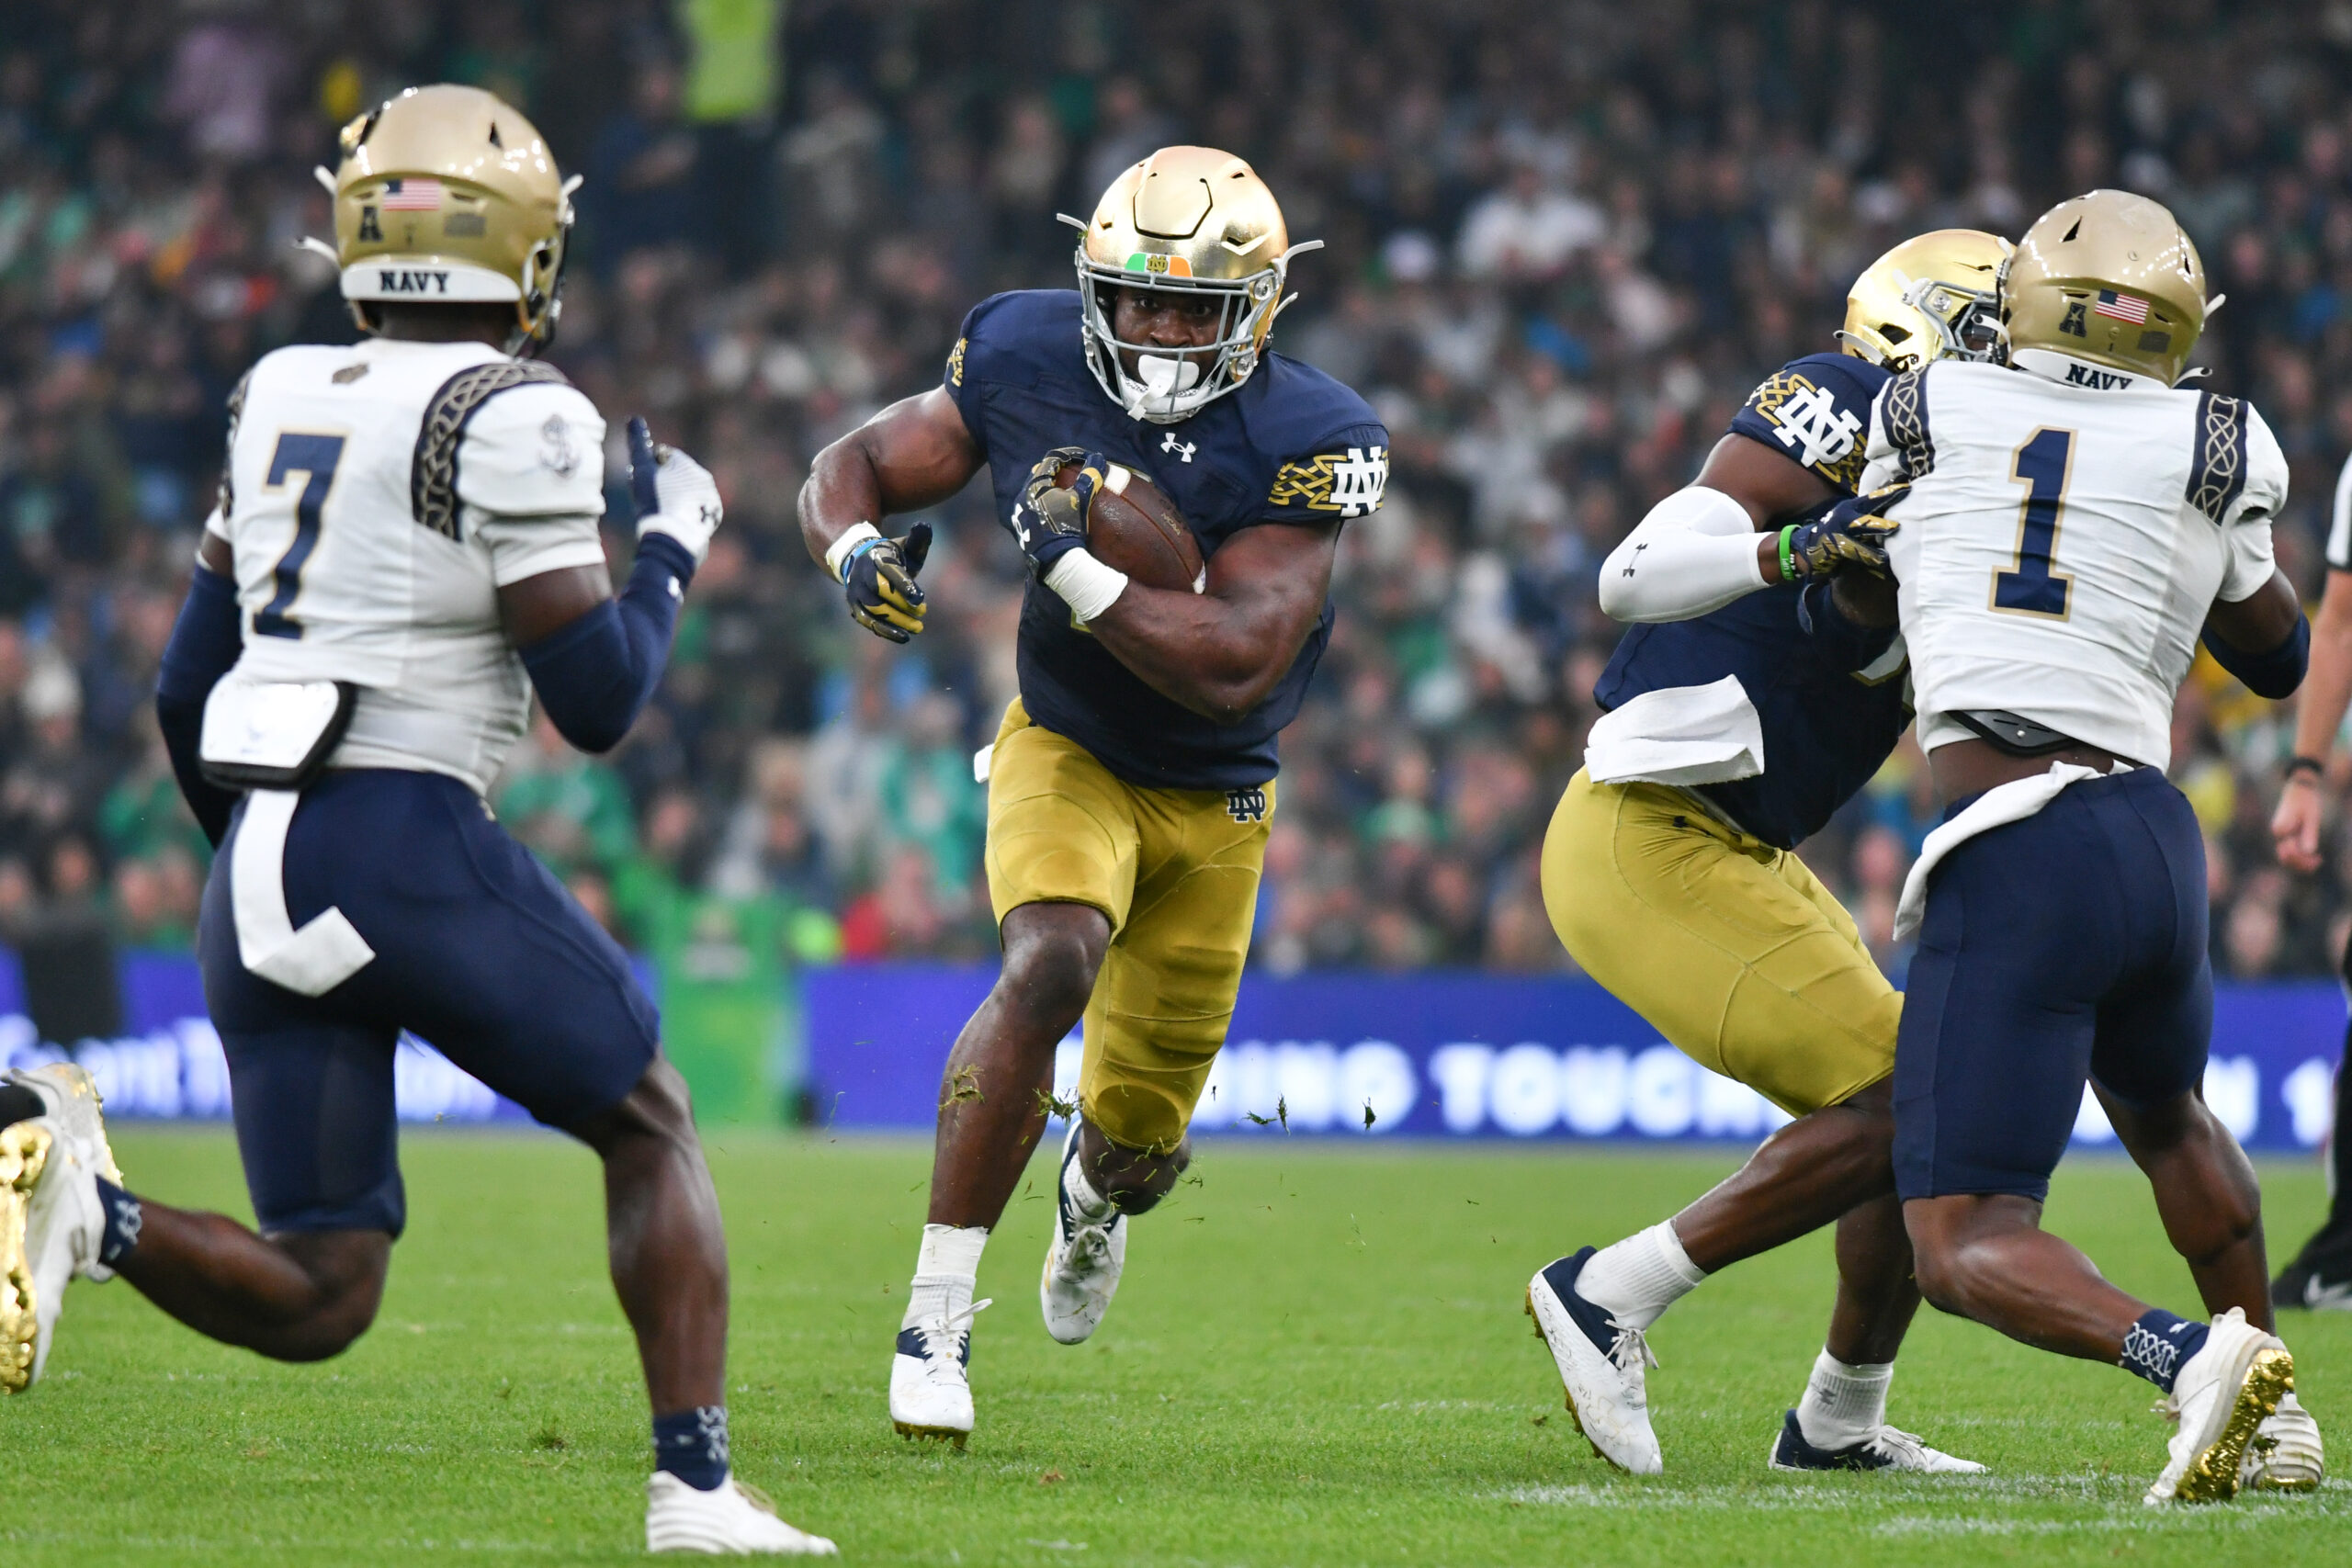 Social media reacts to Audric Estime’s rushing touchdown